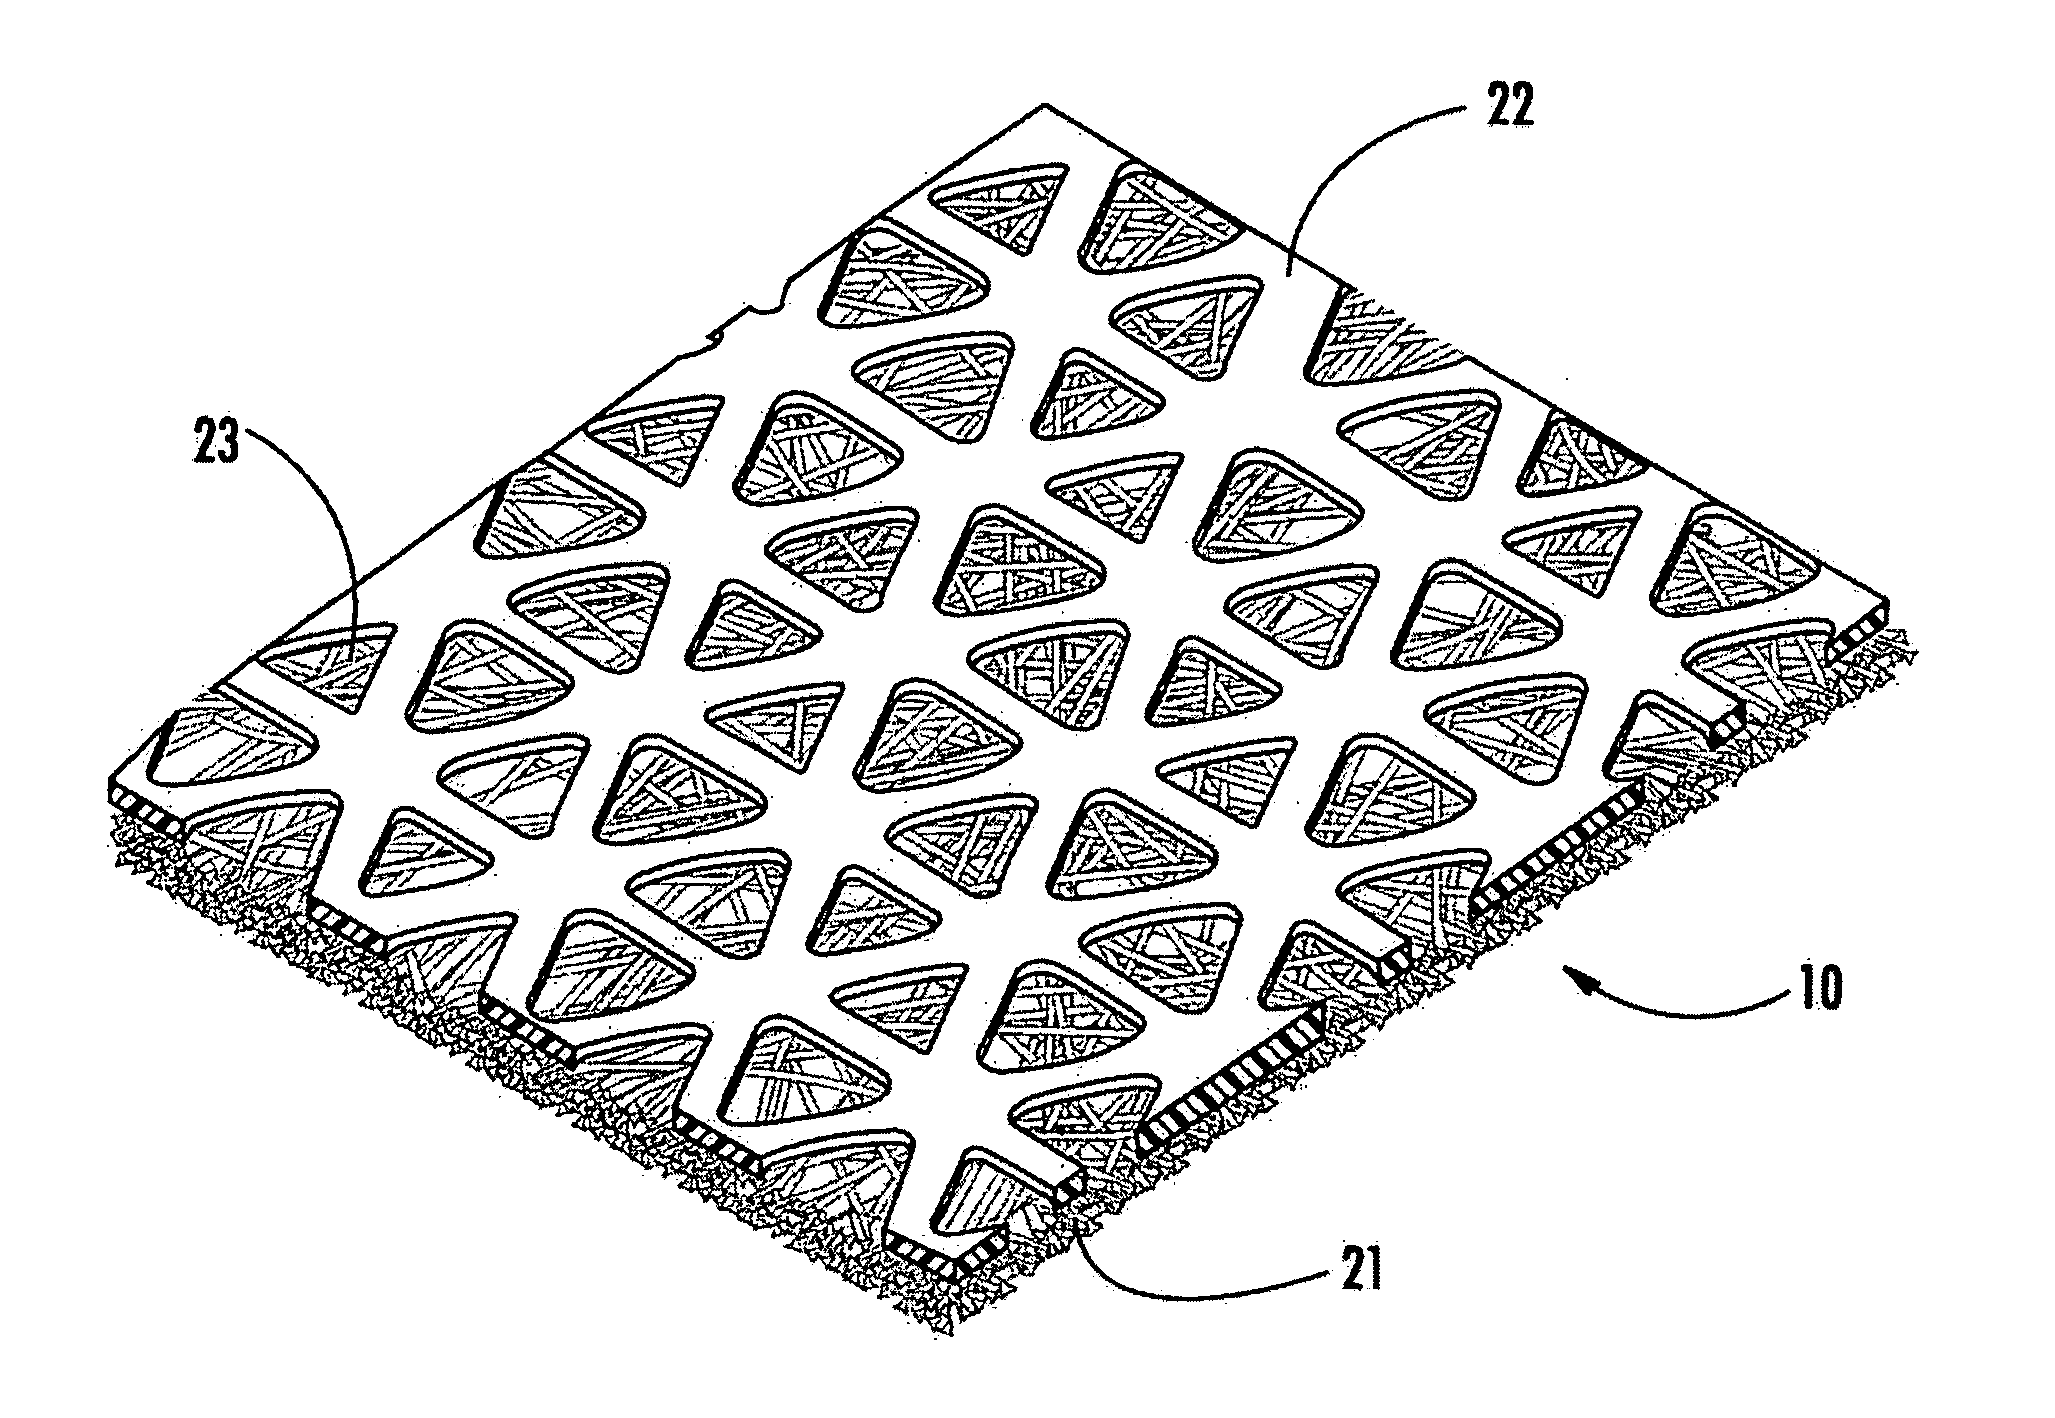 Composite fabric with controlled release of functional chemicals